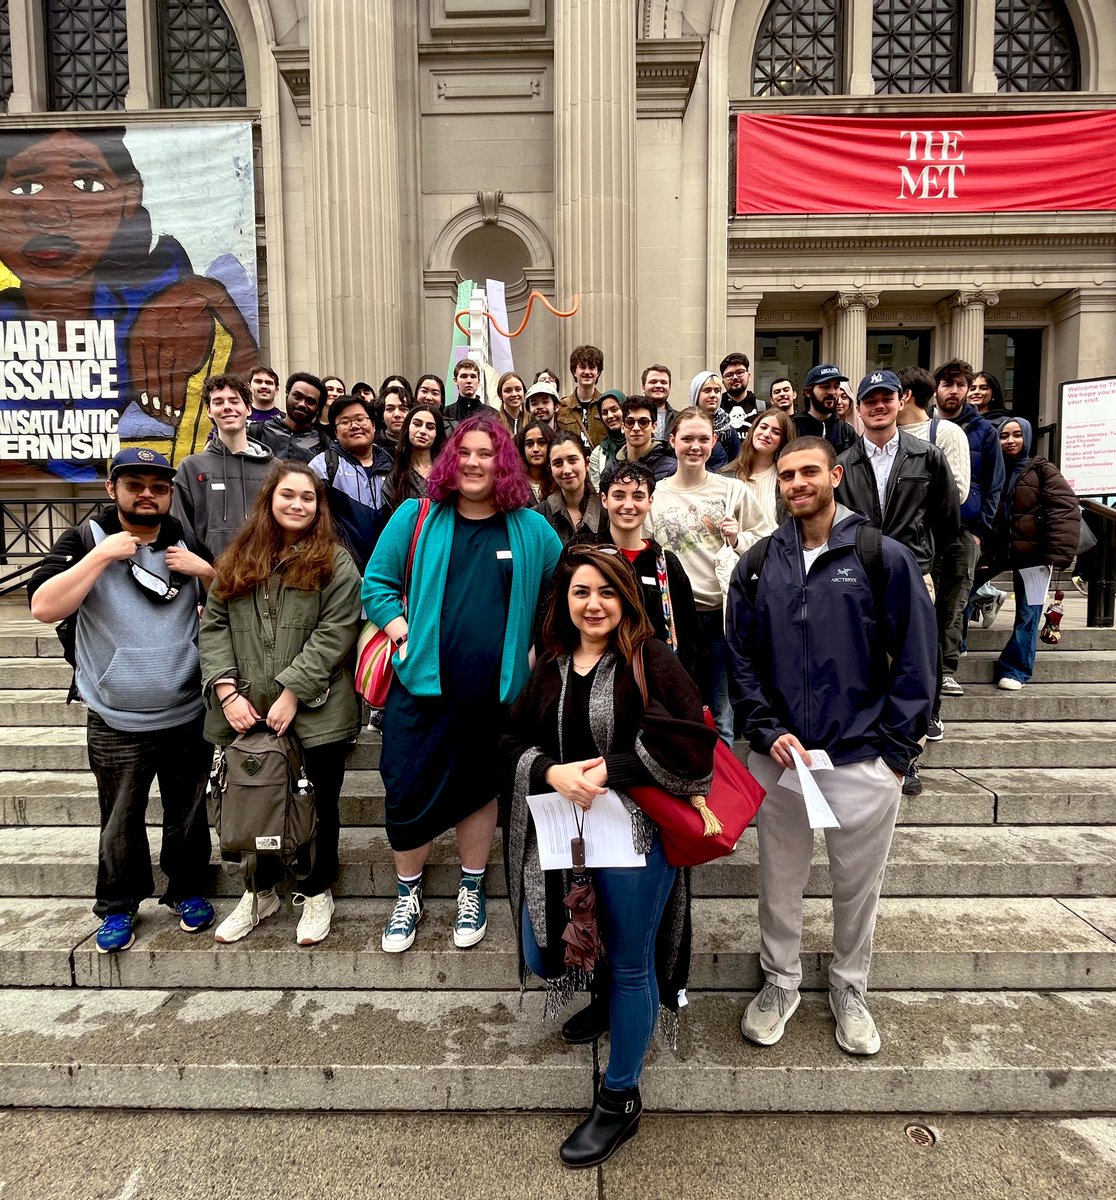 Today, I took my Ottoman history class to the MET to explore the fascinating array of artifacts from the Ottoman era. It's truly a privilege to teach such engaged and curious students in a city like New York.